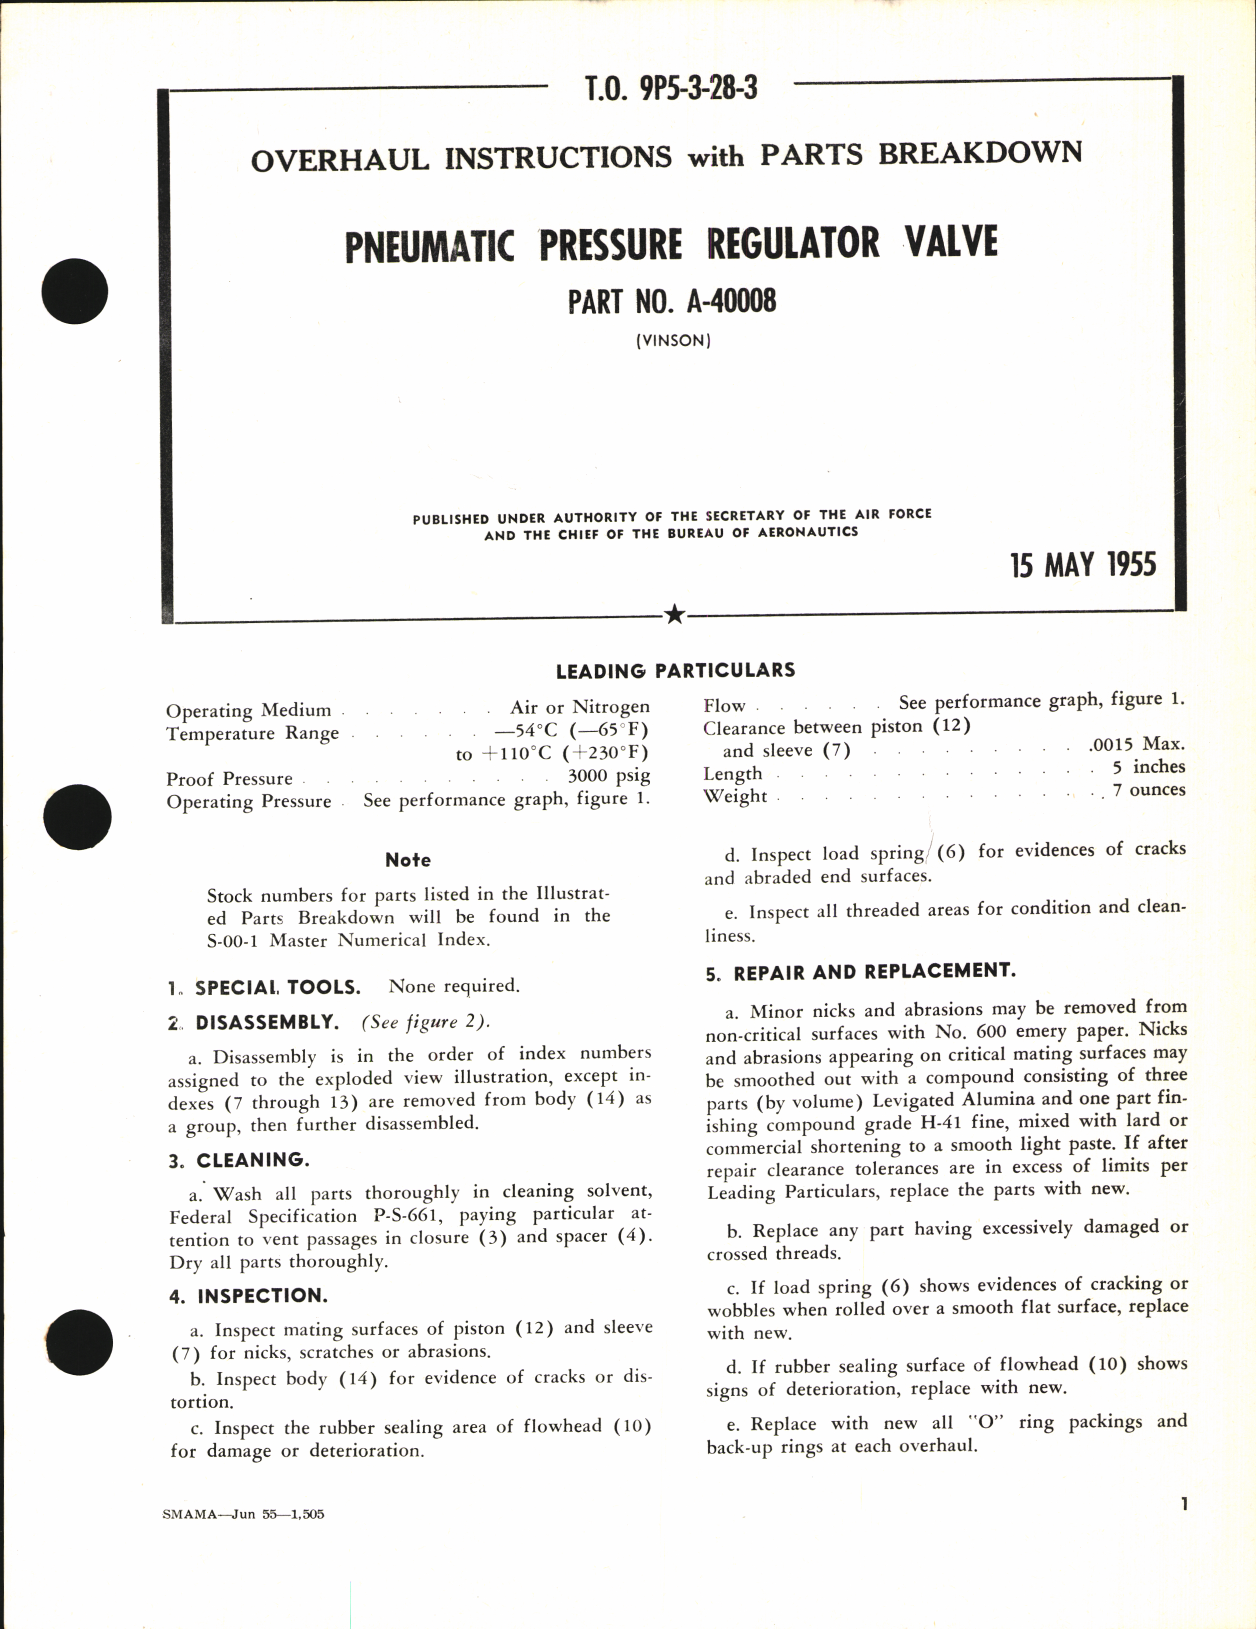 Sample page 1 from AirCorps Library document: Overhaul Instructions with Parts Breakdown for Pneumatic Pressure Regulator Valve Part No. A-40008